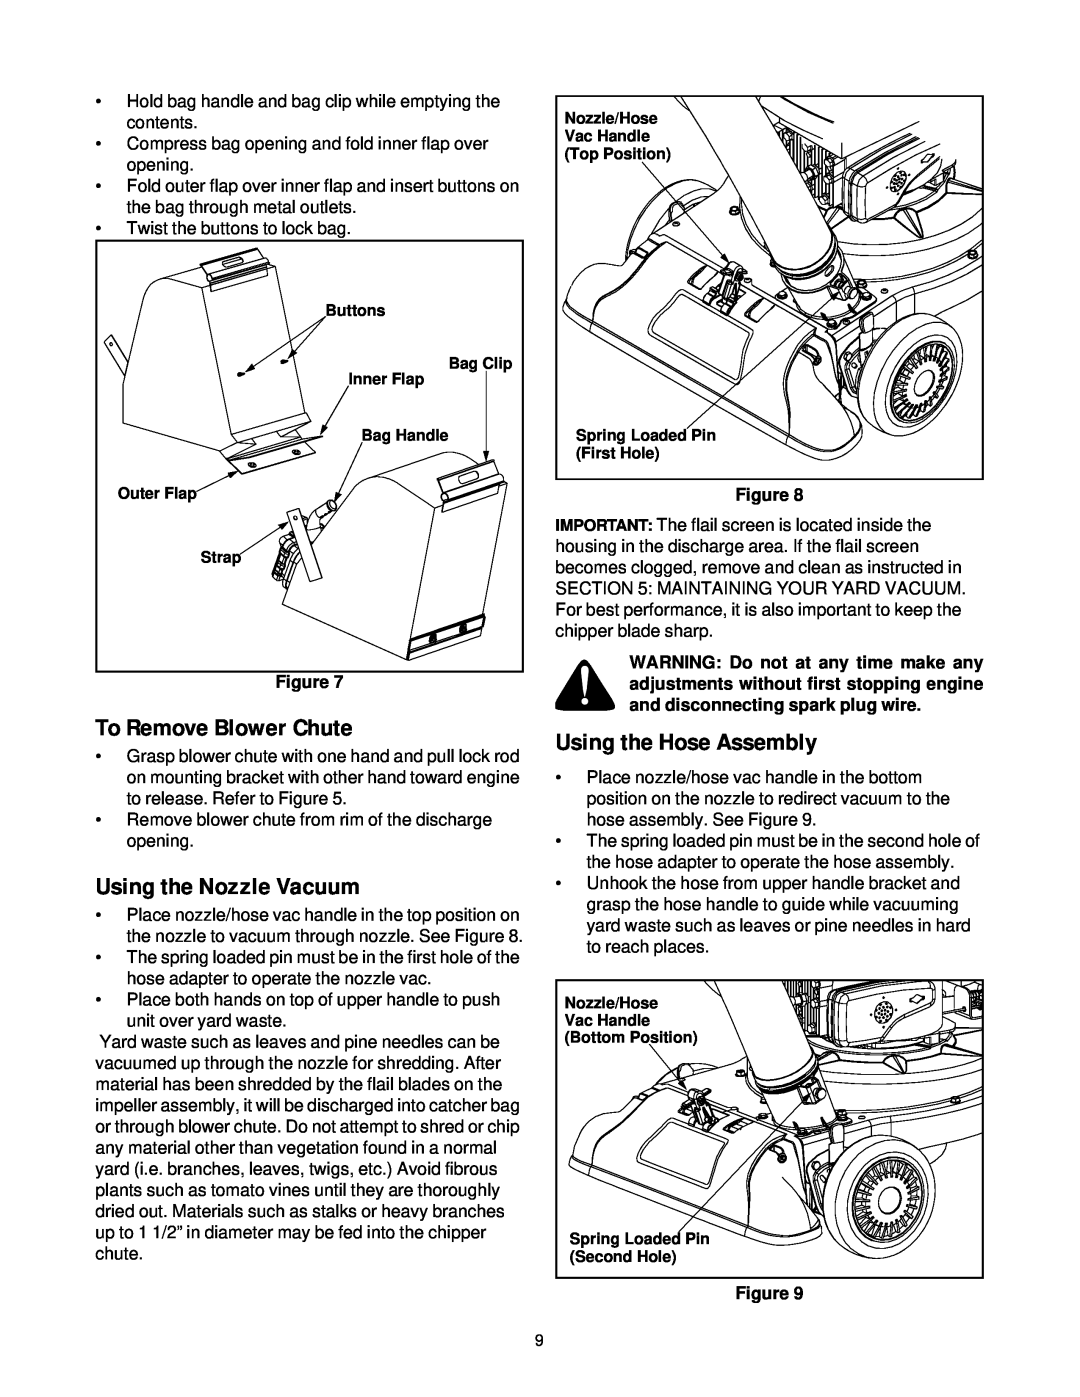 Yard-Man 247.77038 manual To Remove Blower Chute, Using the Nozzle Vacuum, Using the Hose Assembly 